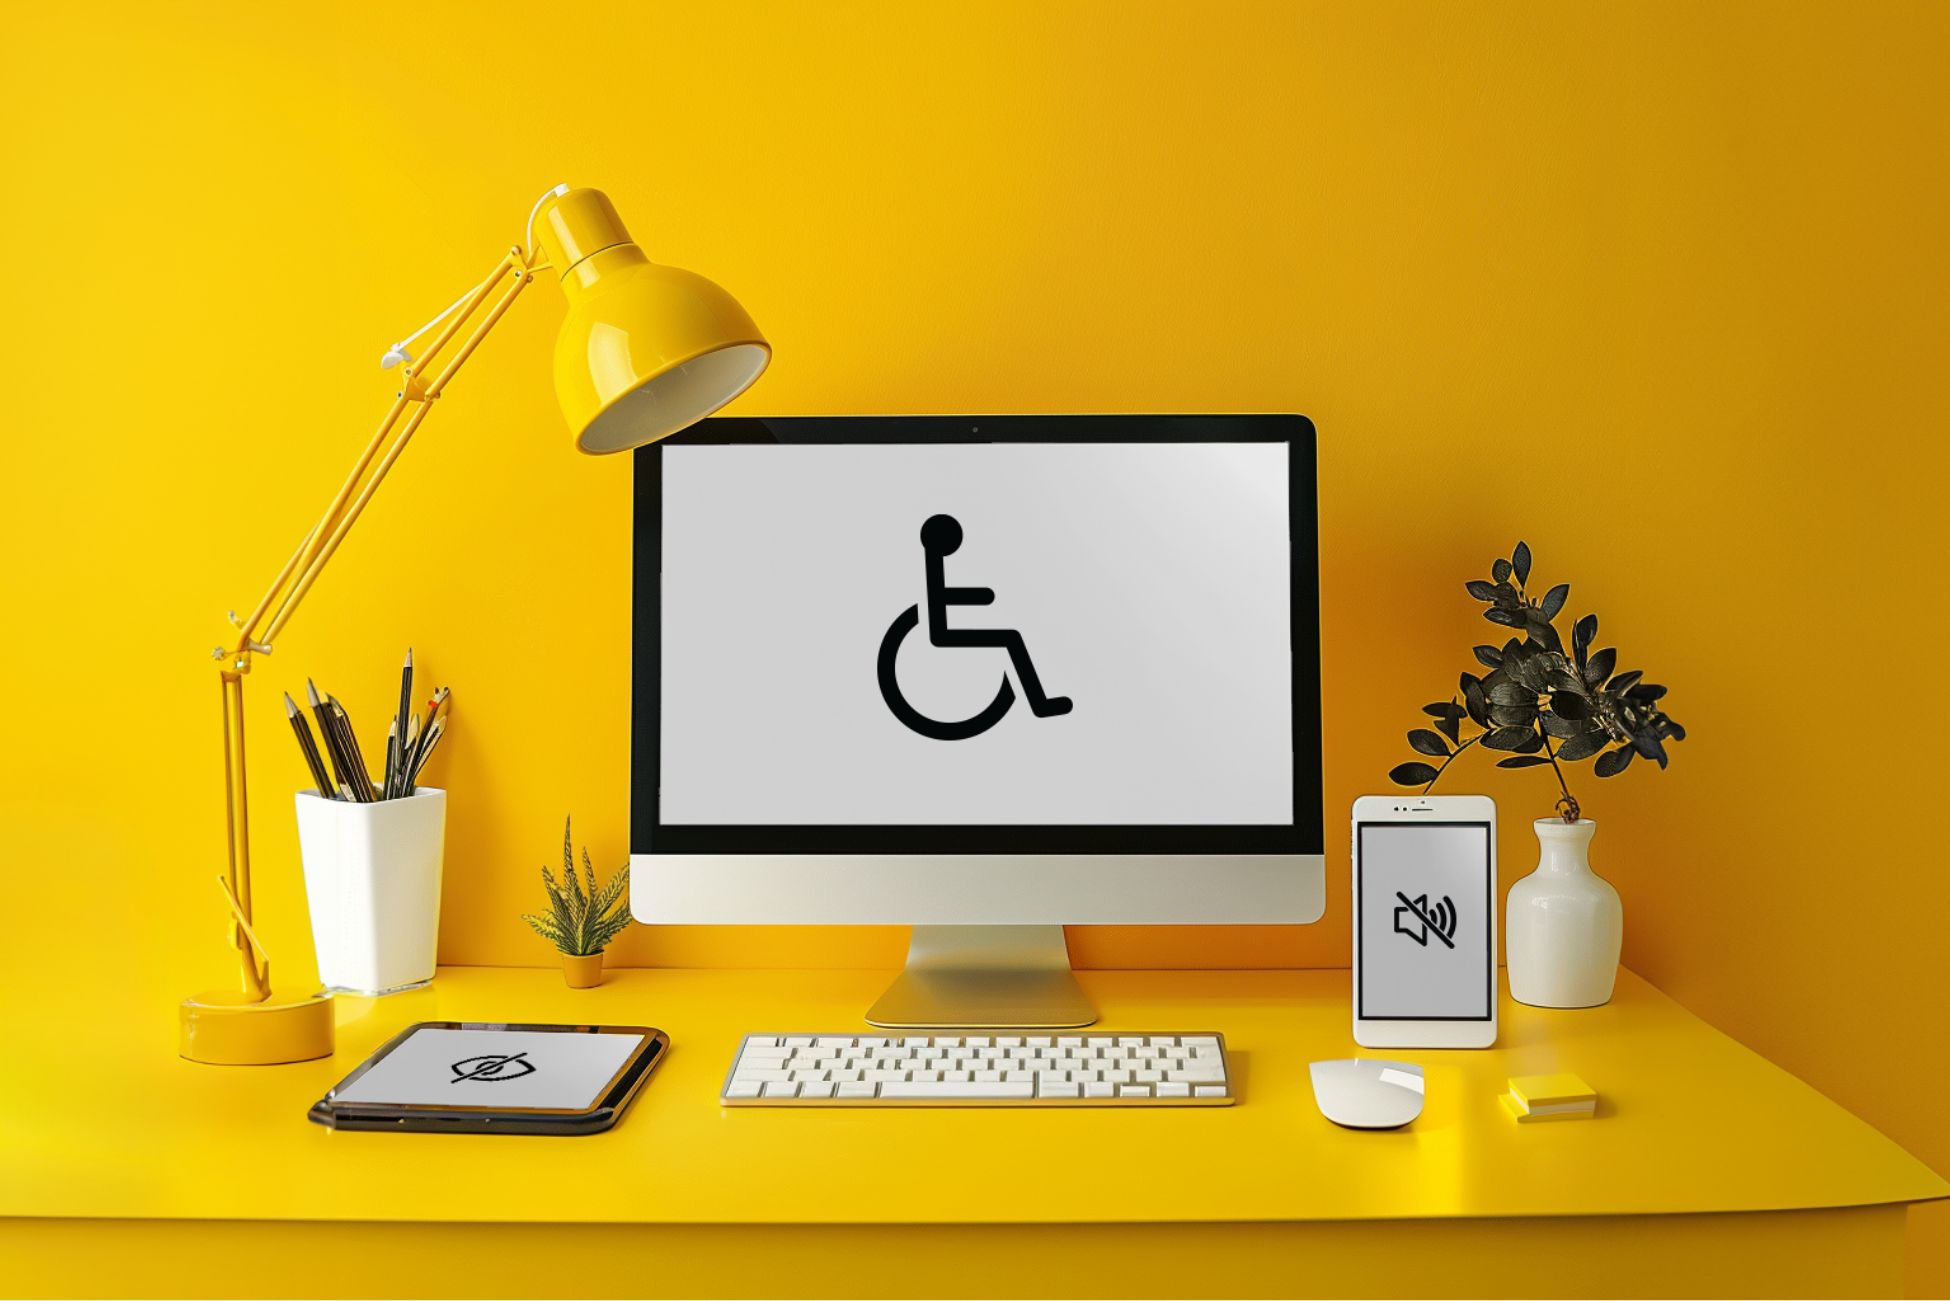 Accessibility in the Physical and Digital Worlds